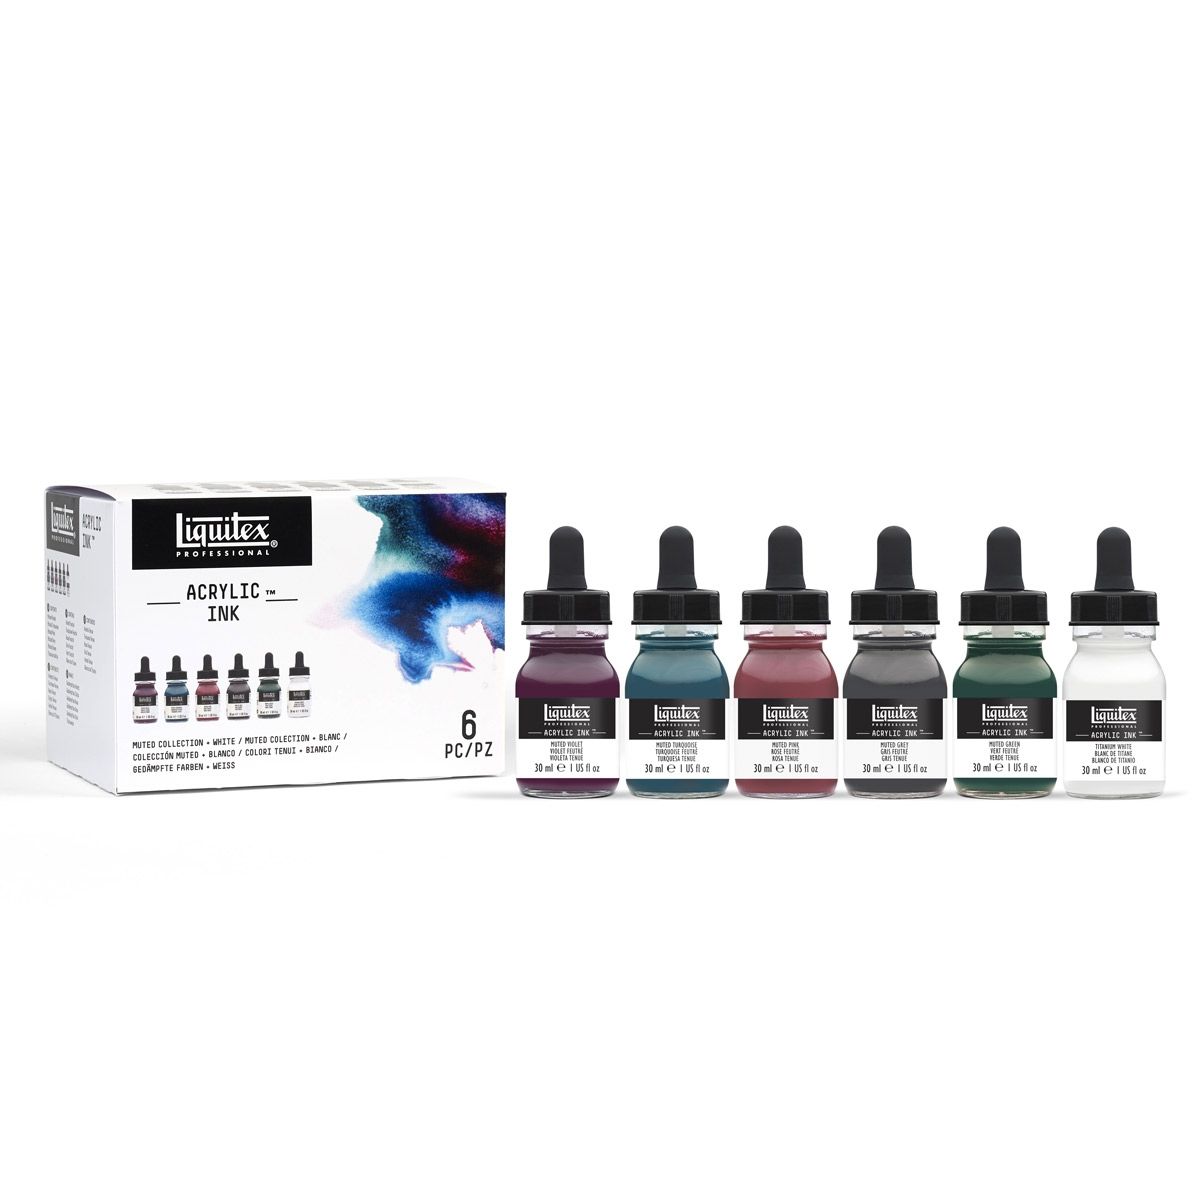 Liquitex Professional Acrylic ink Muted collection + White outside of box